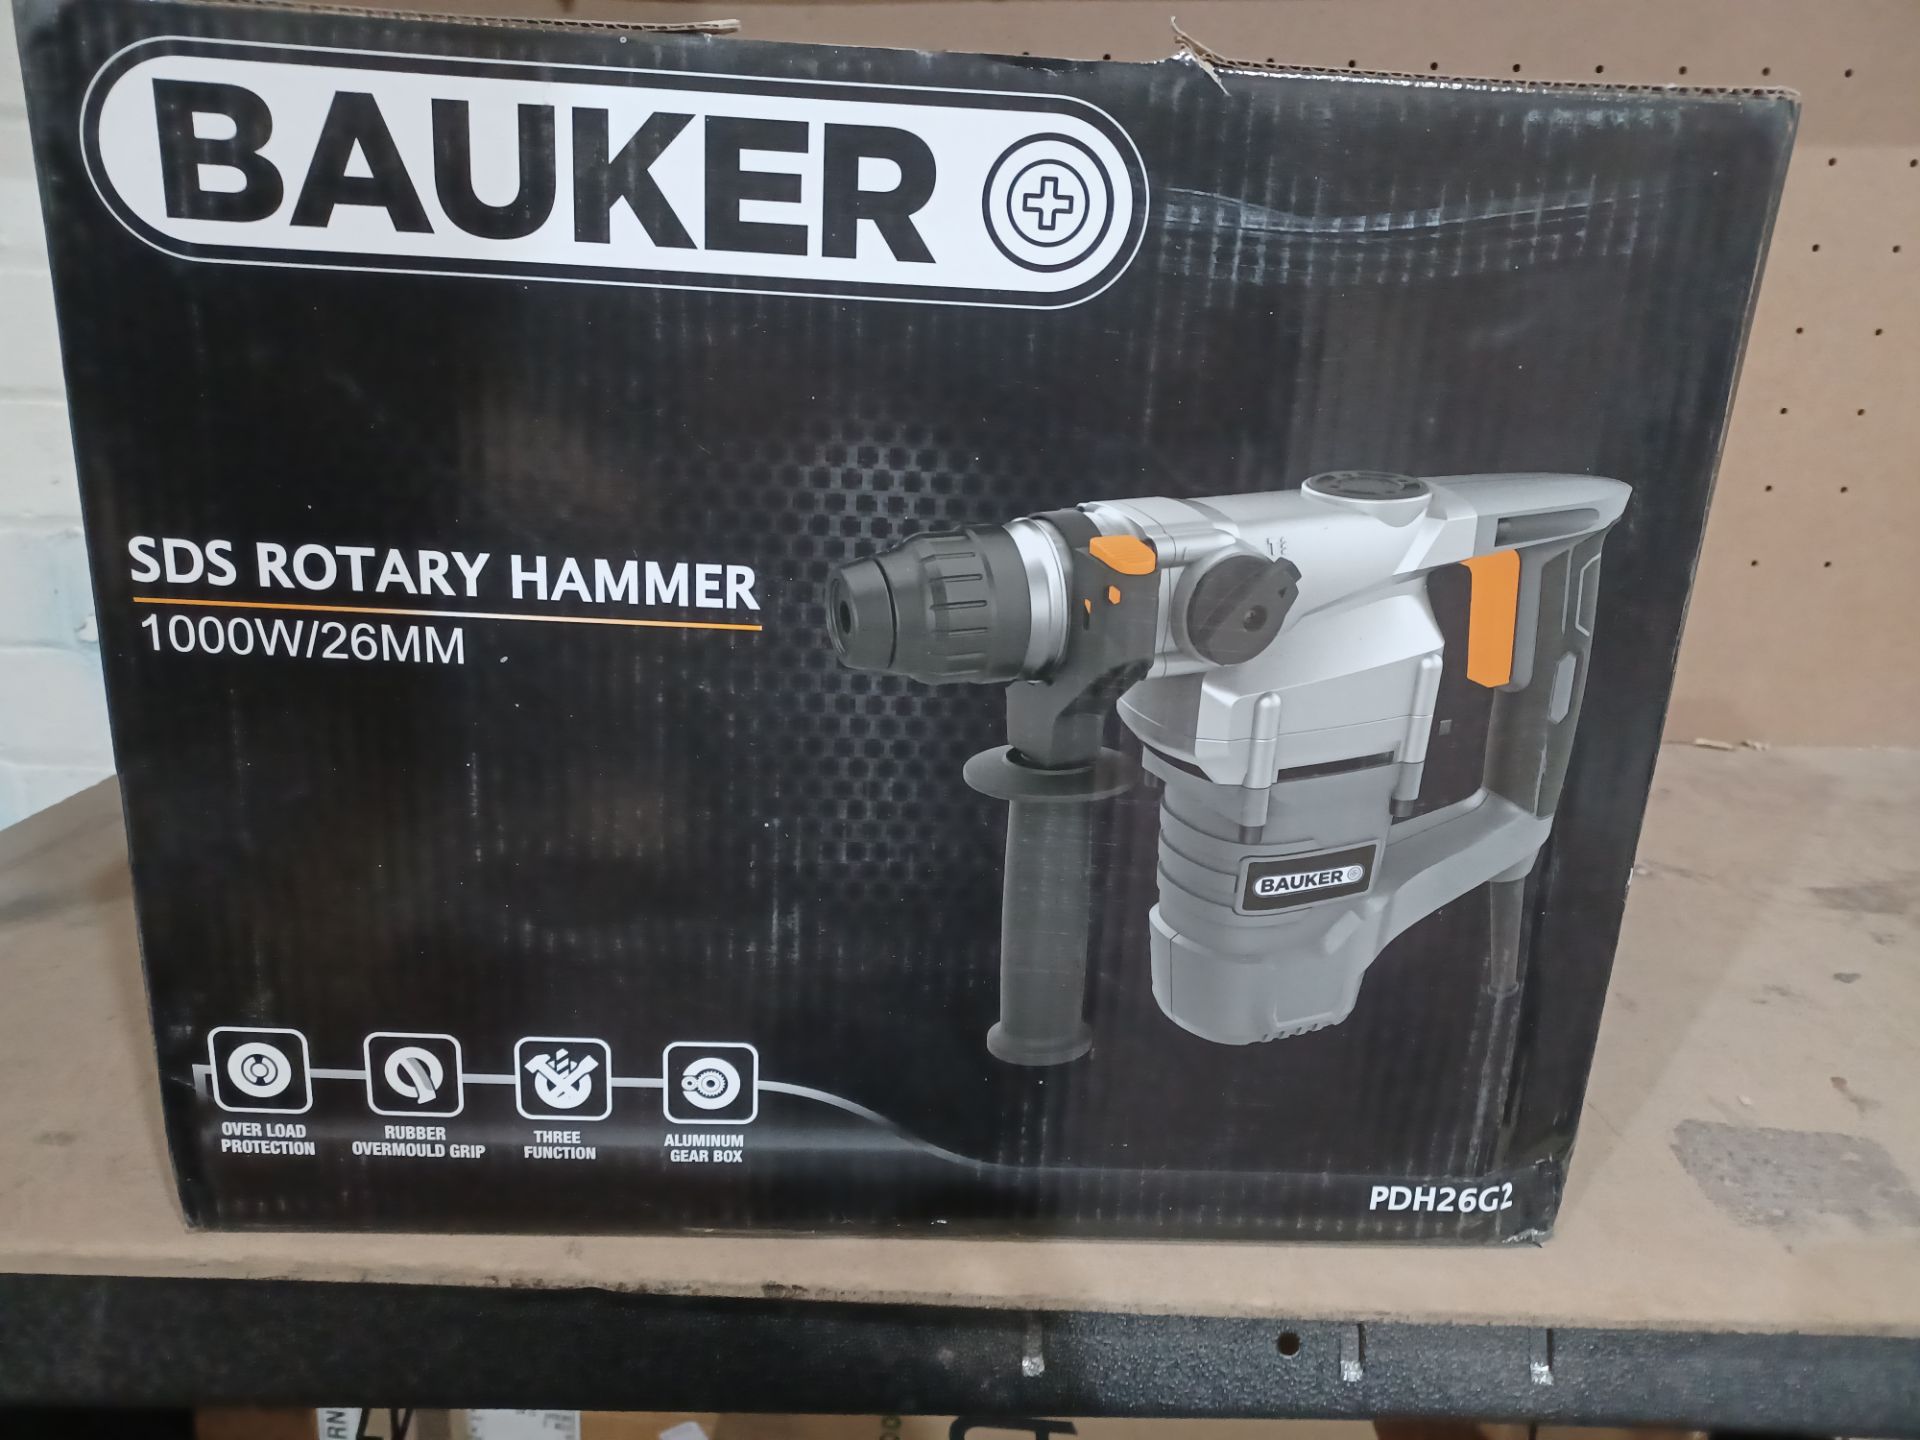 3 X BAUKER 1000W 26MM SDS PLUS ROTARY HAMMER DRILL UNCHECKED - PCK